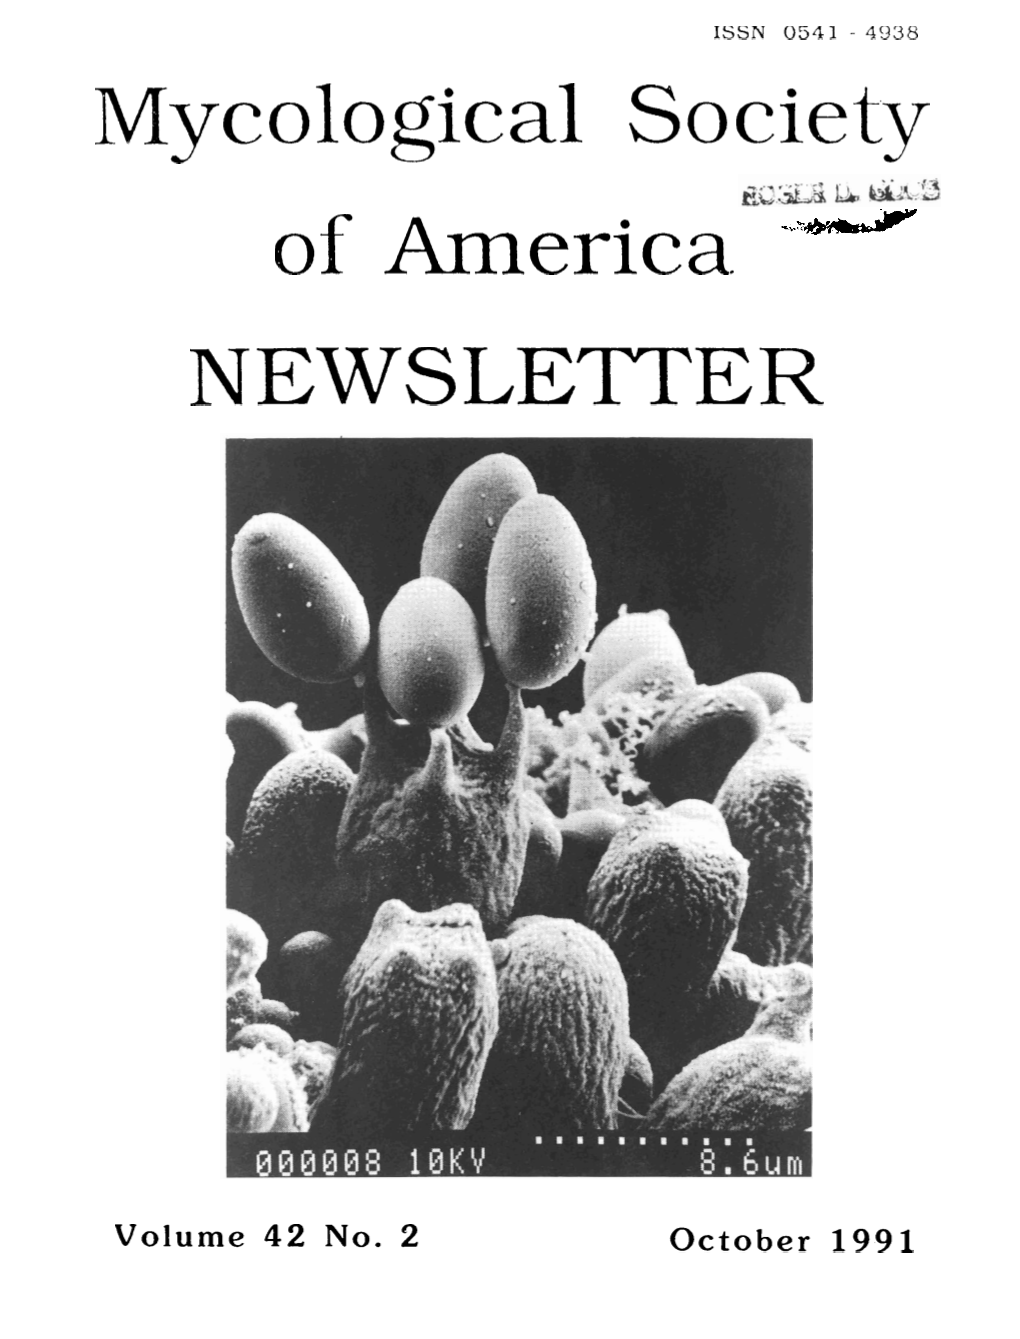 October 1991 SUSTAINING MEMBERS of the MYCOLOGICAL SOCIETY of AMERICA